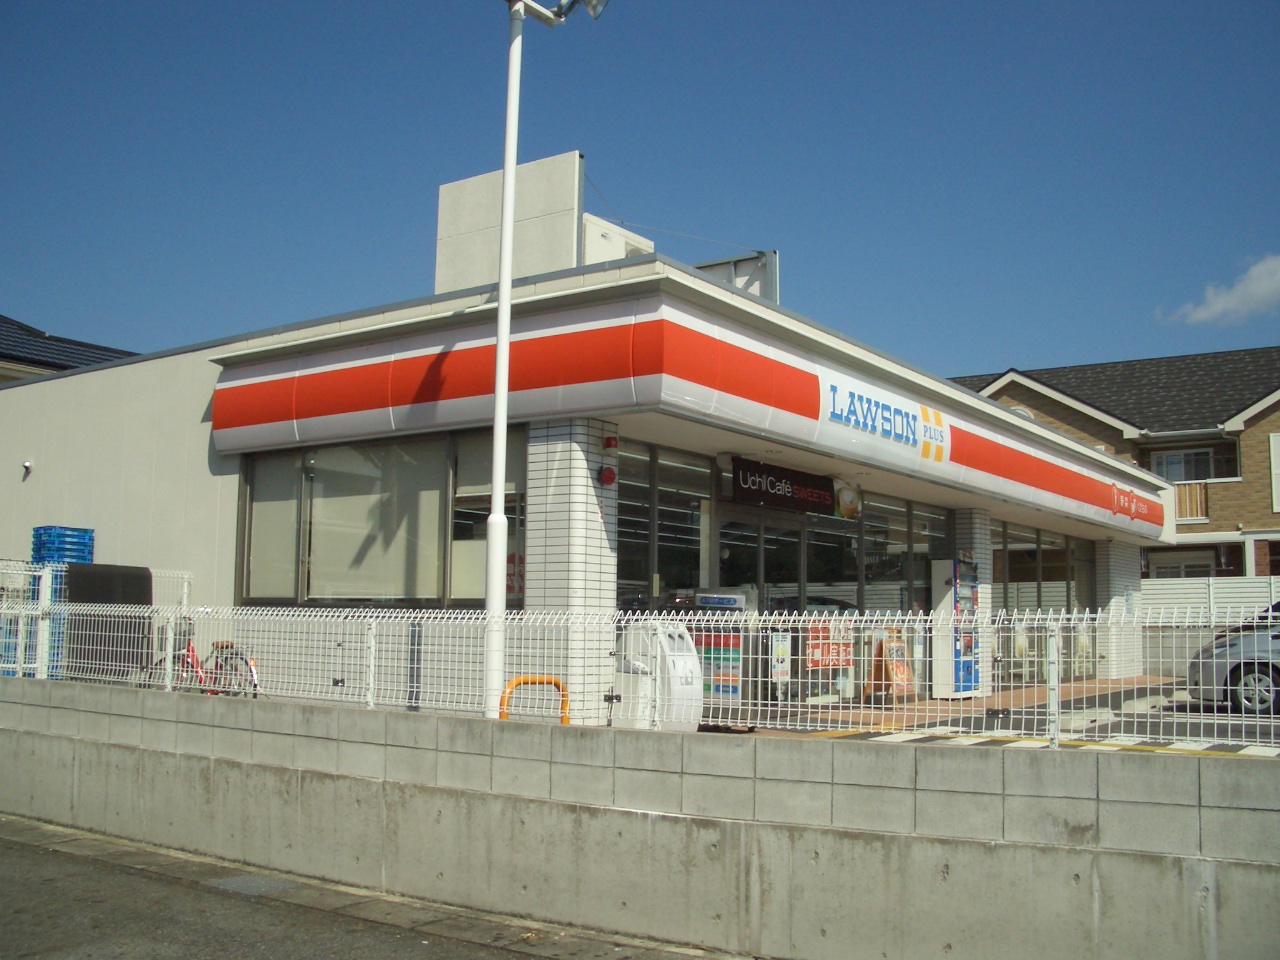 Convenience store. Lawson plus Ritto navel 5-chome up (convenience store) 170m